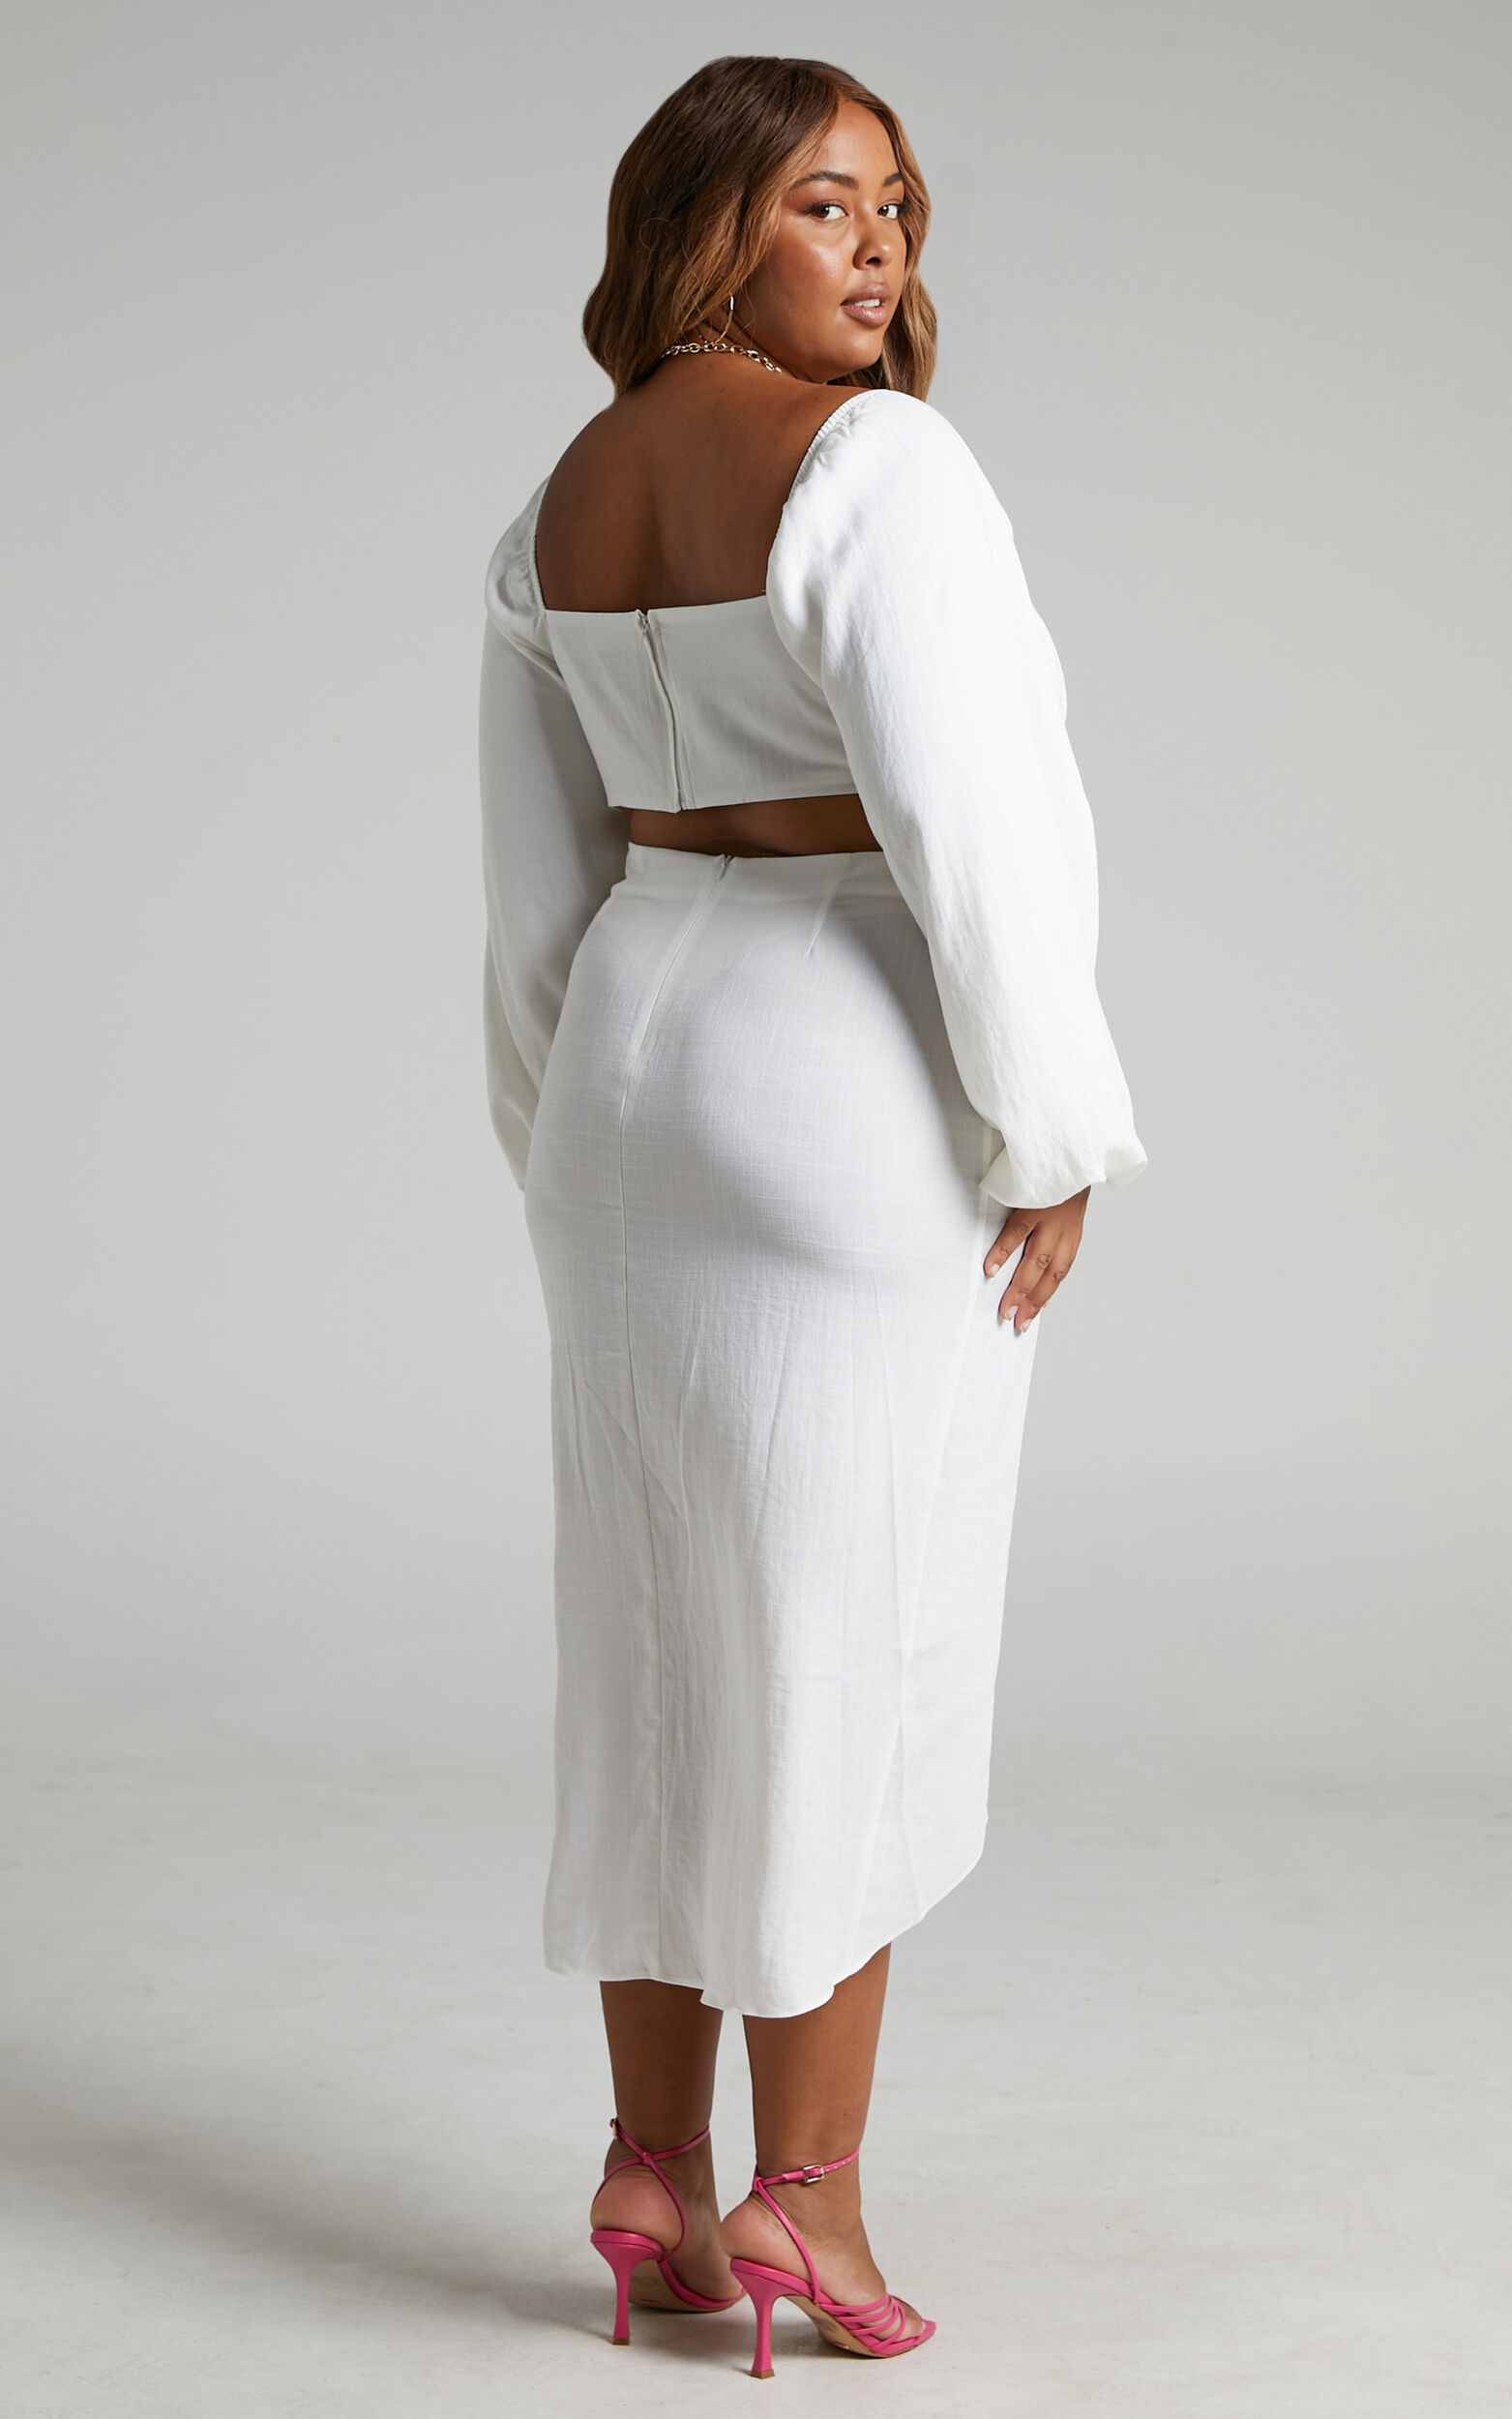 Seyla Moon Two Piece Skirt and Crop Top Set - White (FINAL SALE) - H&O